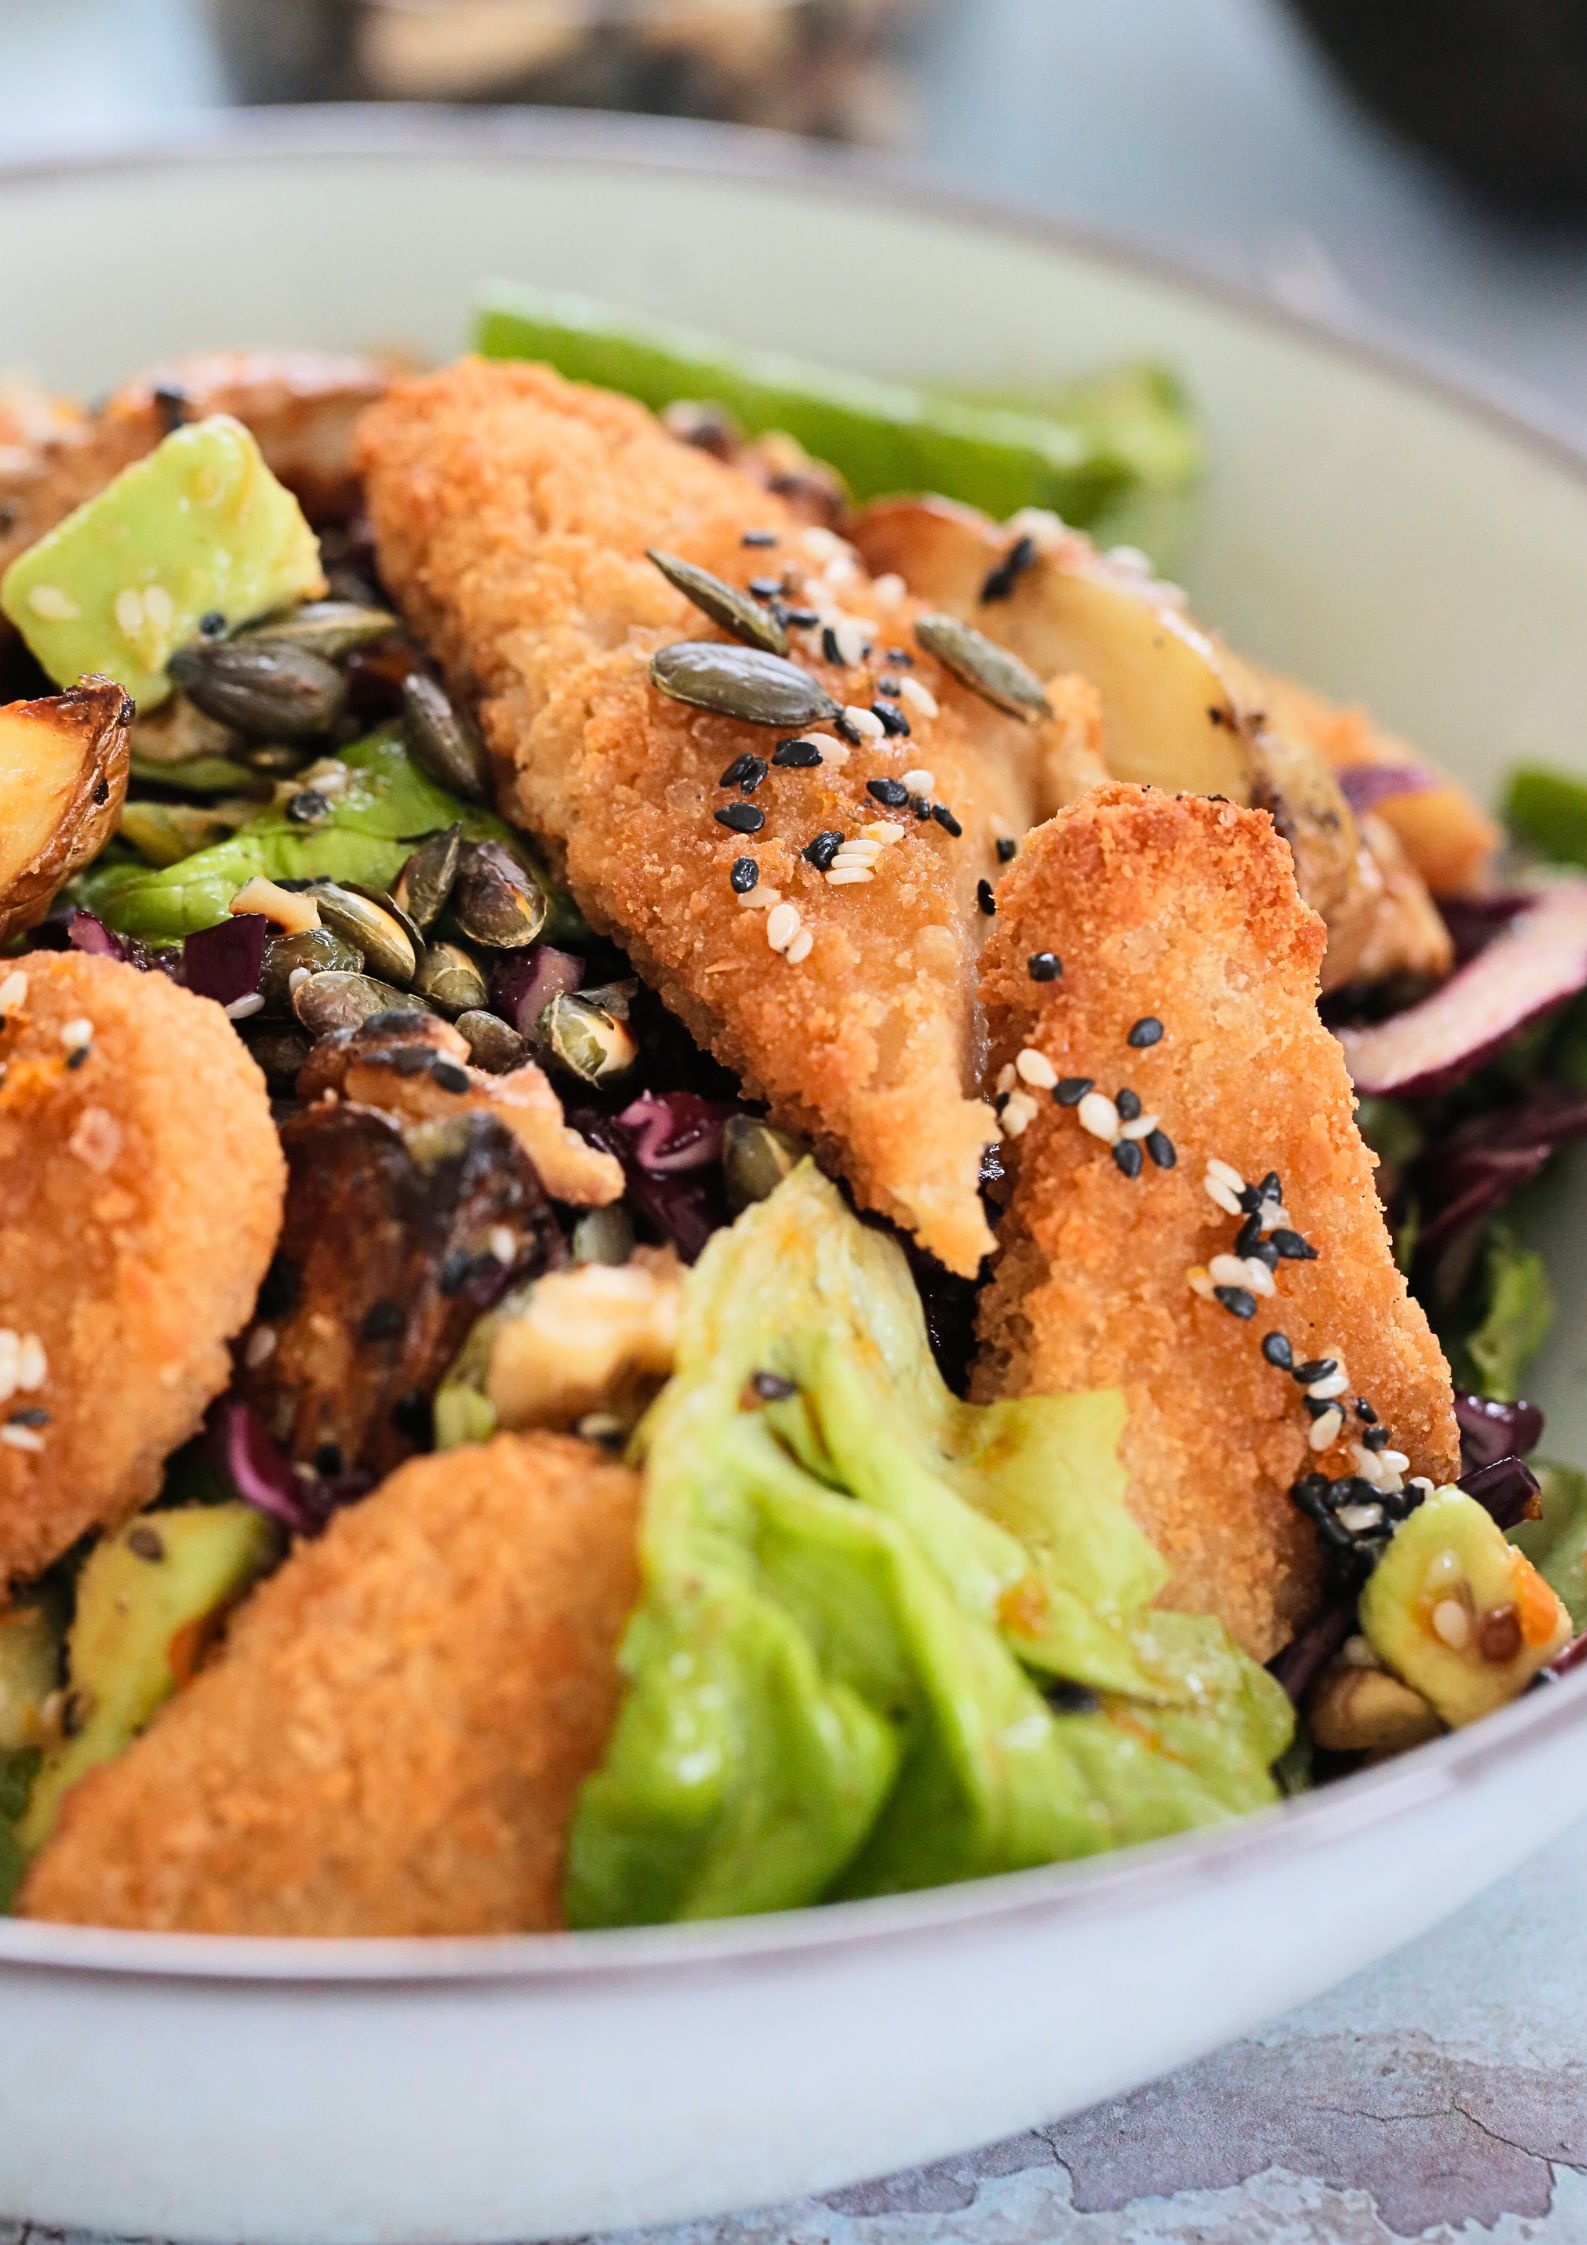 A warm winter salad recipe with crunchy fresh veggies, plant based chicken tenders and a spiced sesame orange salad dressing. A totally delicious but easy vegan lunch idea. Recipe on thecookandhim.com | #vegansaladrecipes #vegansaladdressing #saladrecipes #meatlessmeal #plantbasedrecipes